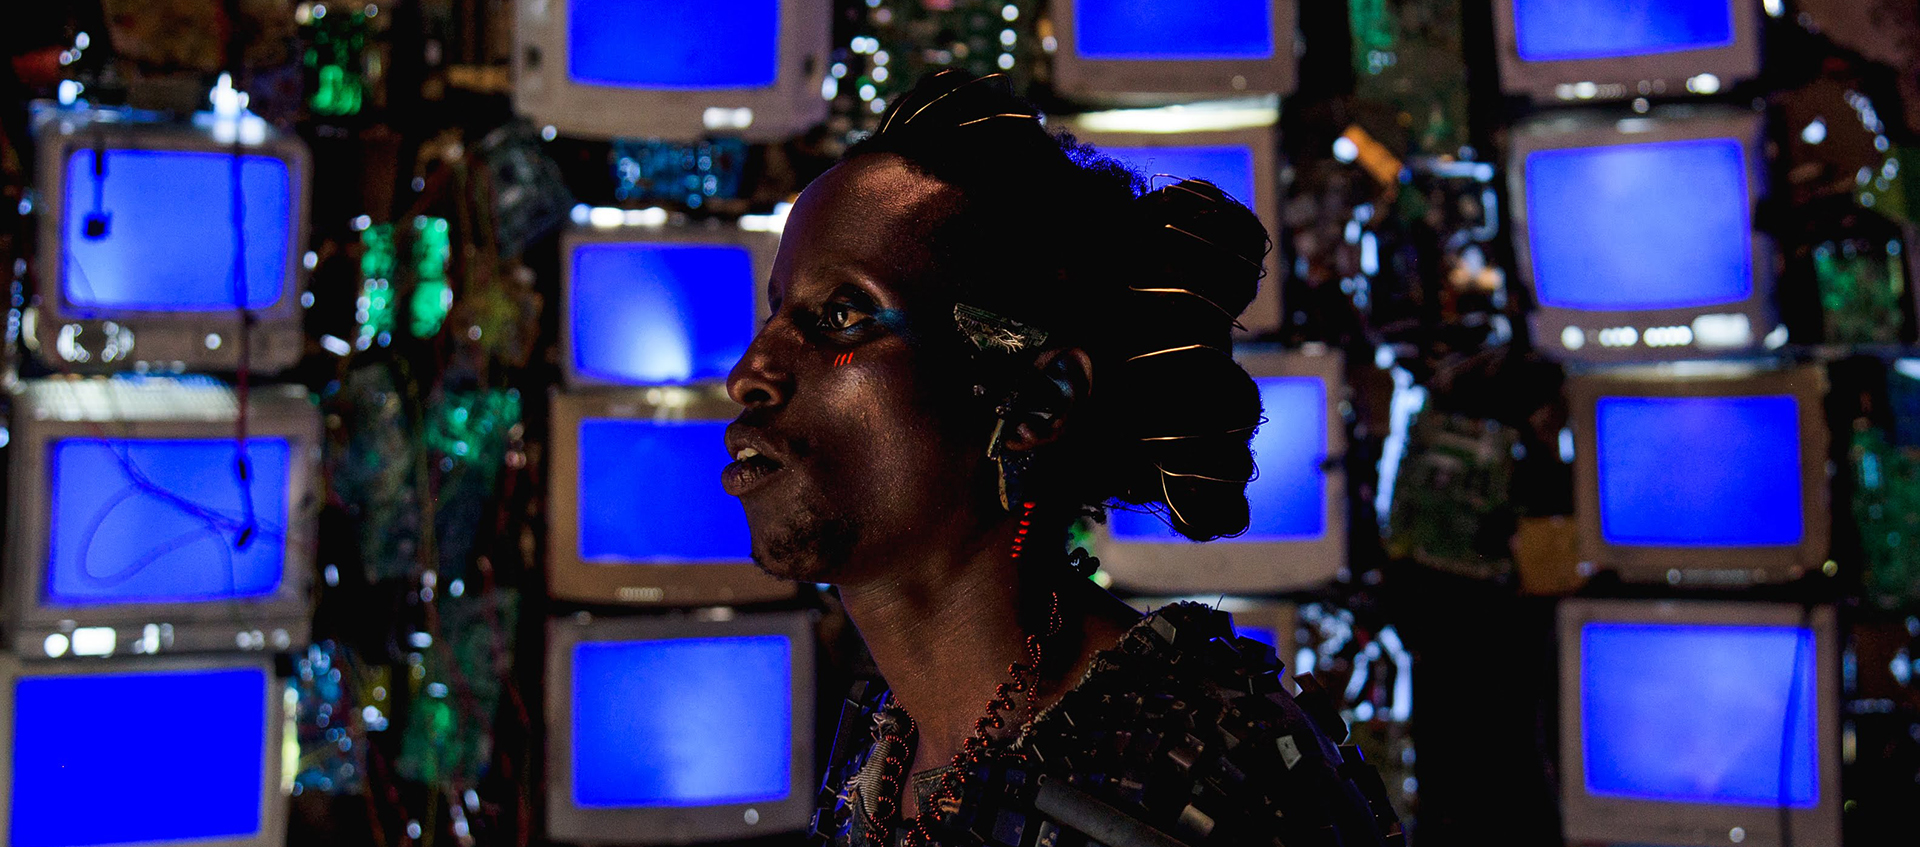 Profile view of Bertrand Ninteretse in Neptune Frost. They have red and blue paint around their eye, golden wire wrapped in their hair, and multicolored wire jewelry on their ears and neck. Behind them is a wall filled with rows of blue computer screens.